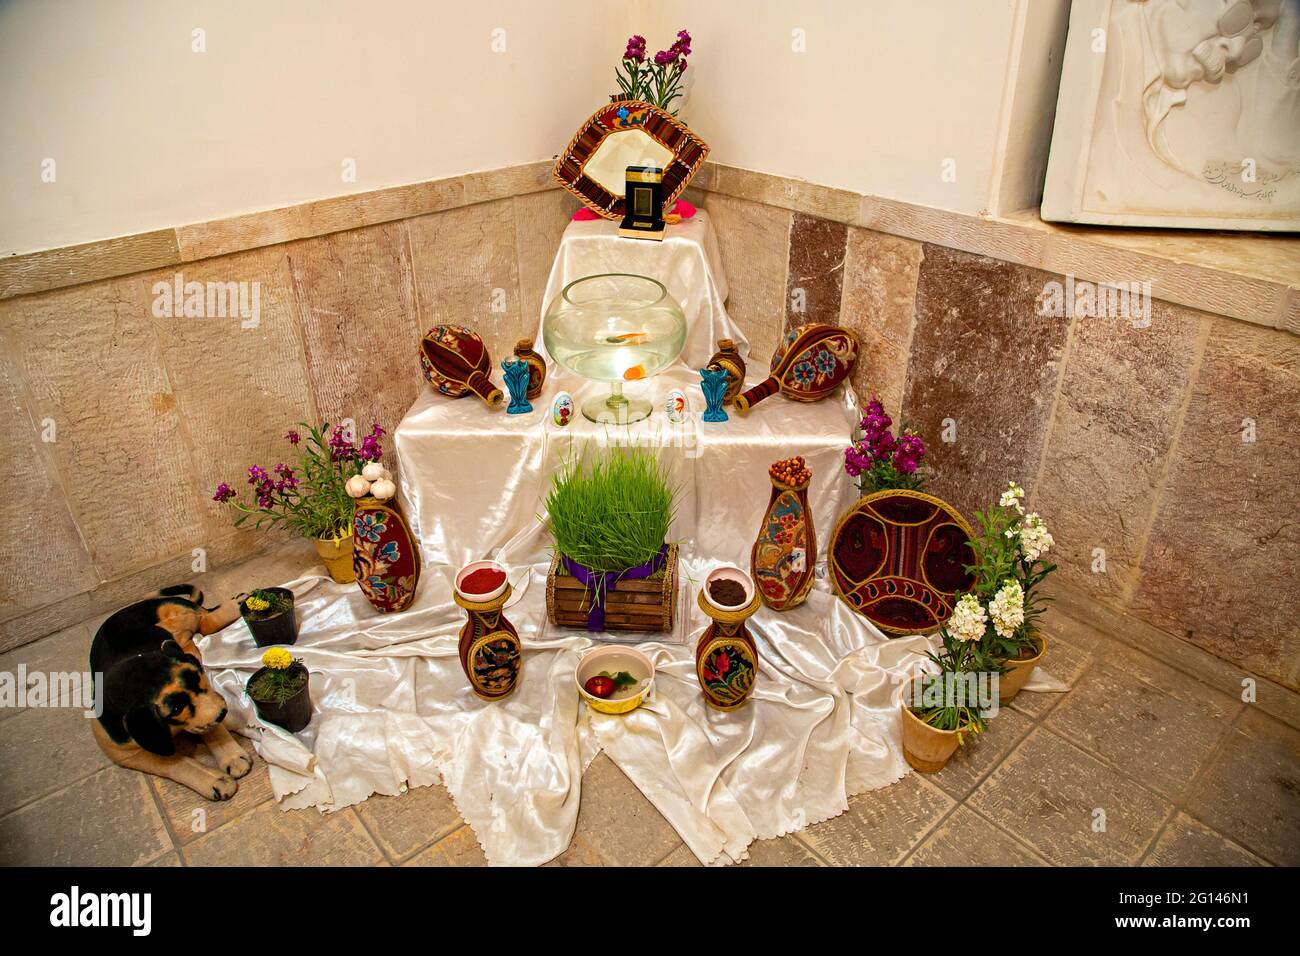 Persian New Year's Table known as Haftsin or Nowruz Table with seven items beginning with the letter S, during Nowruz celebrations, in Kerman, Iran Stock Photo